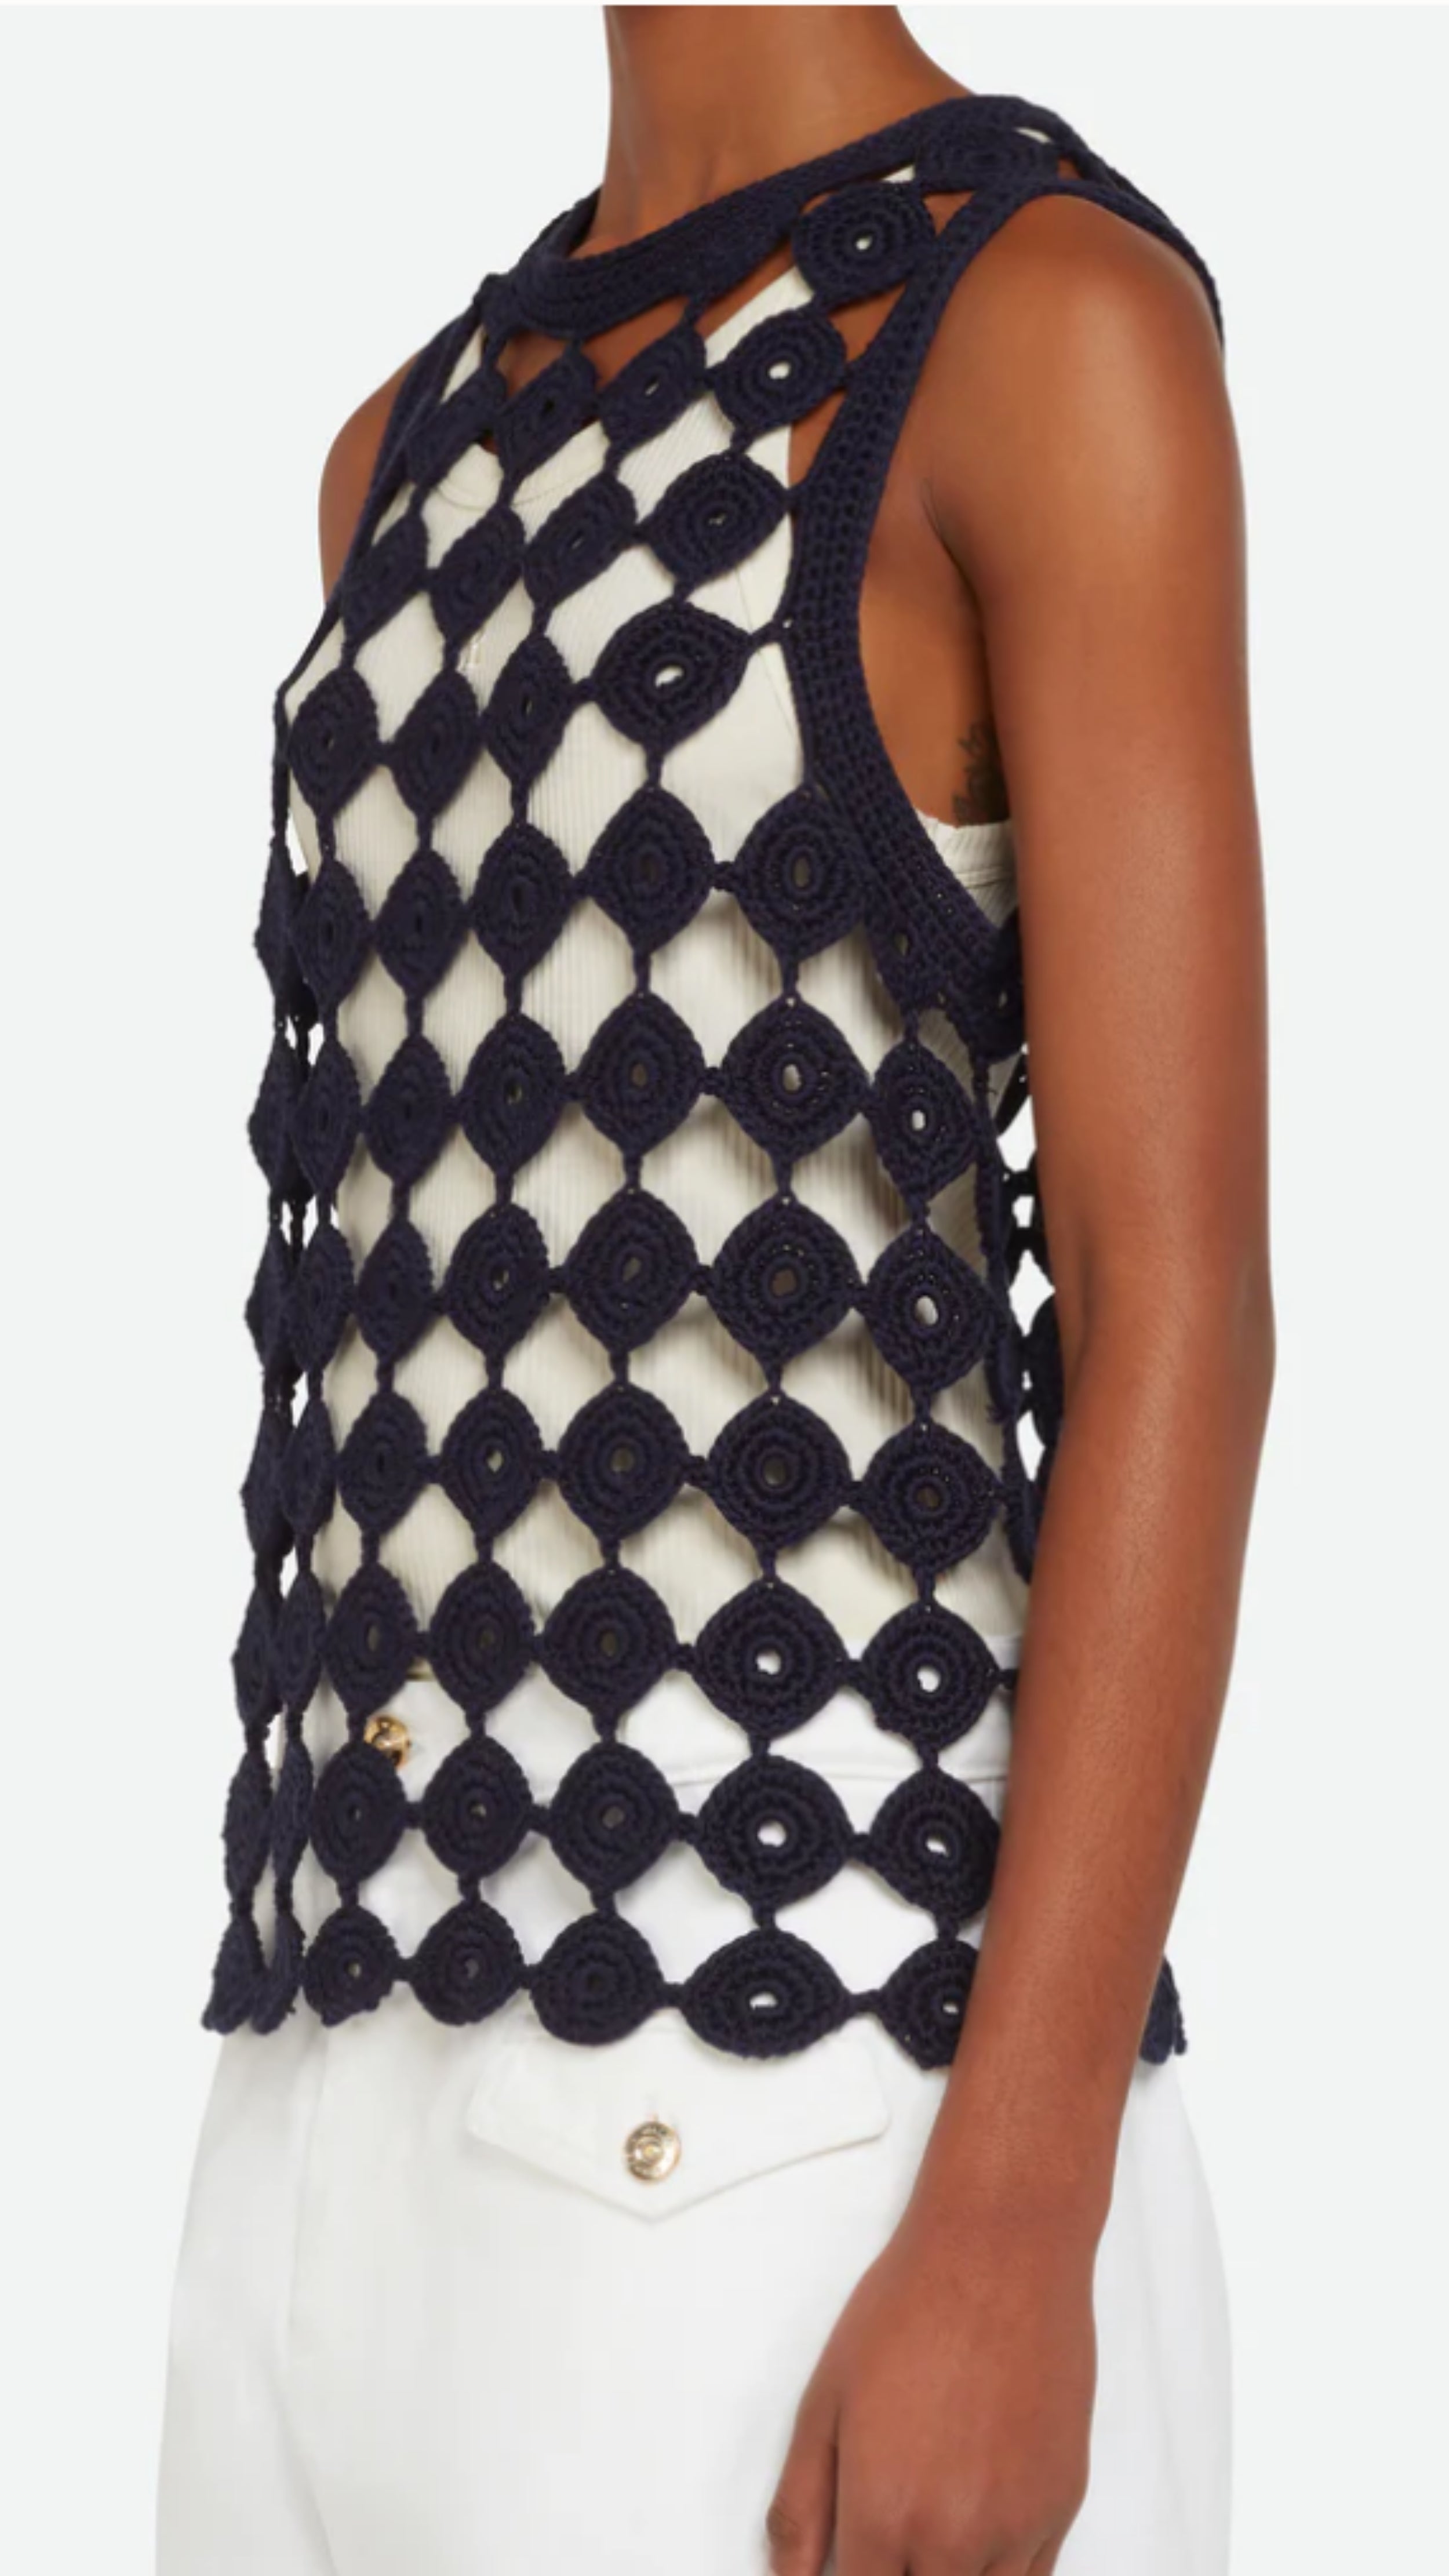 Wales Bonner Stanza Knit Vest Crafted from an open knit cotton and lycra blend in navy blue. A sleeveless style vest top with a rounded neckline. Shown on a model facing side.